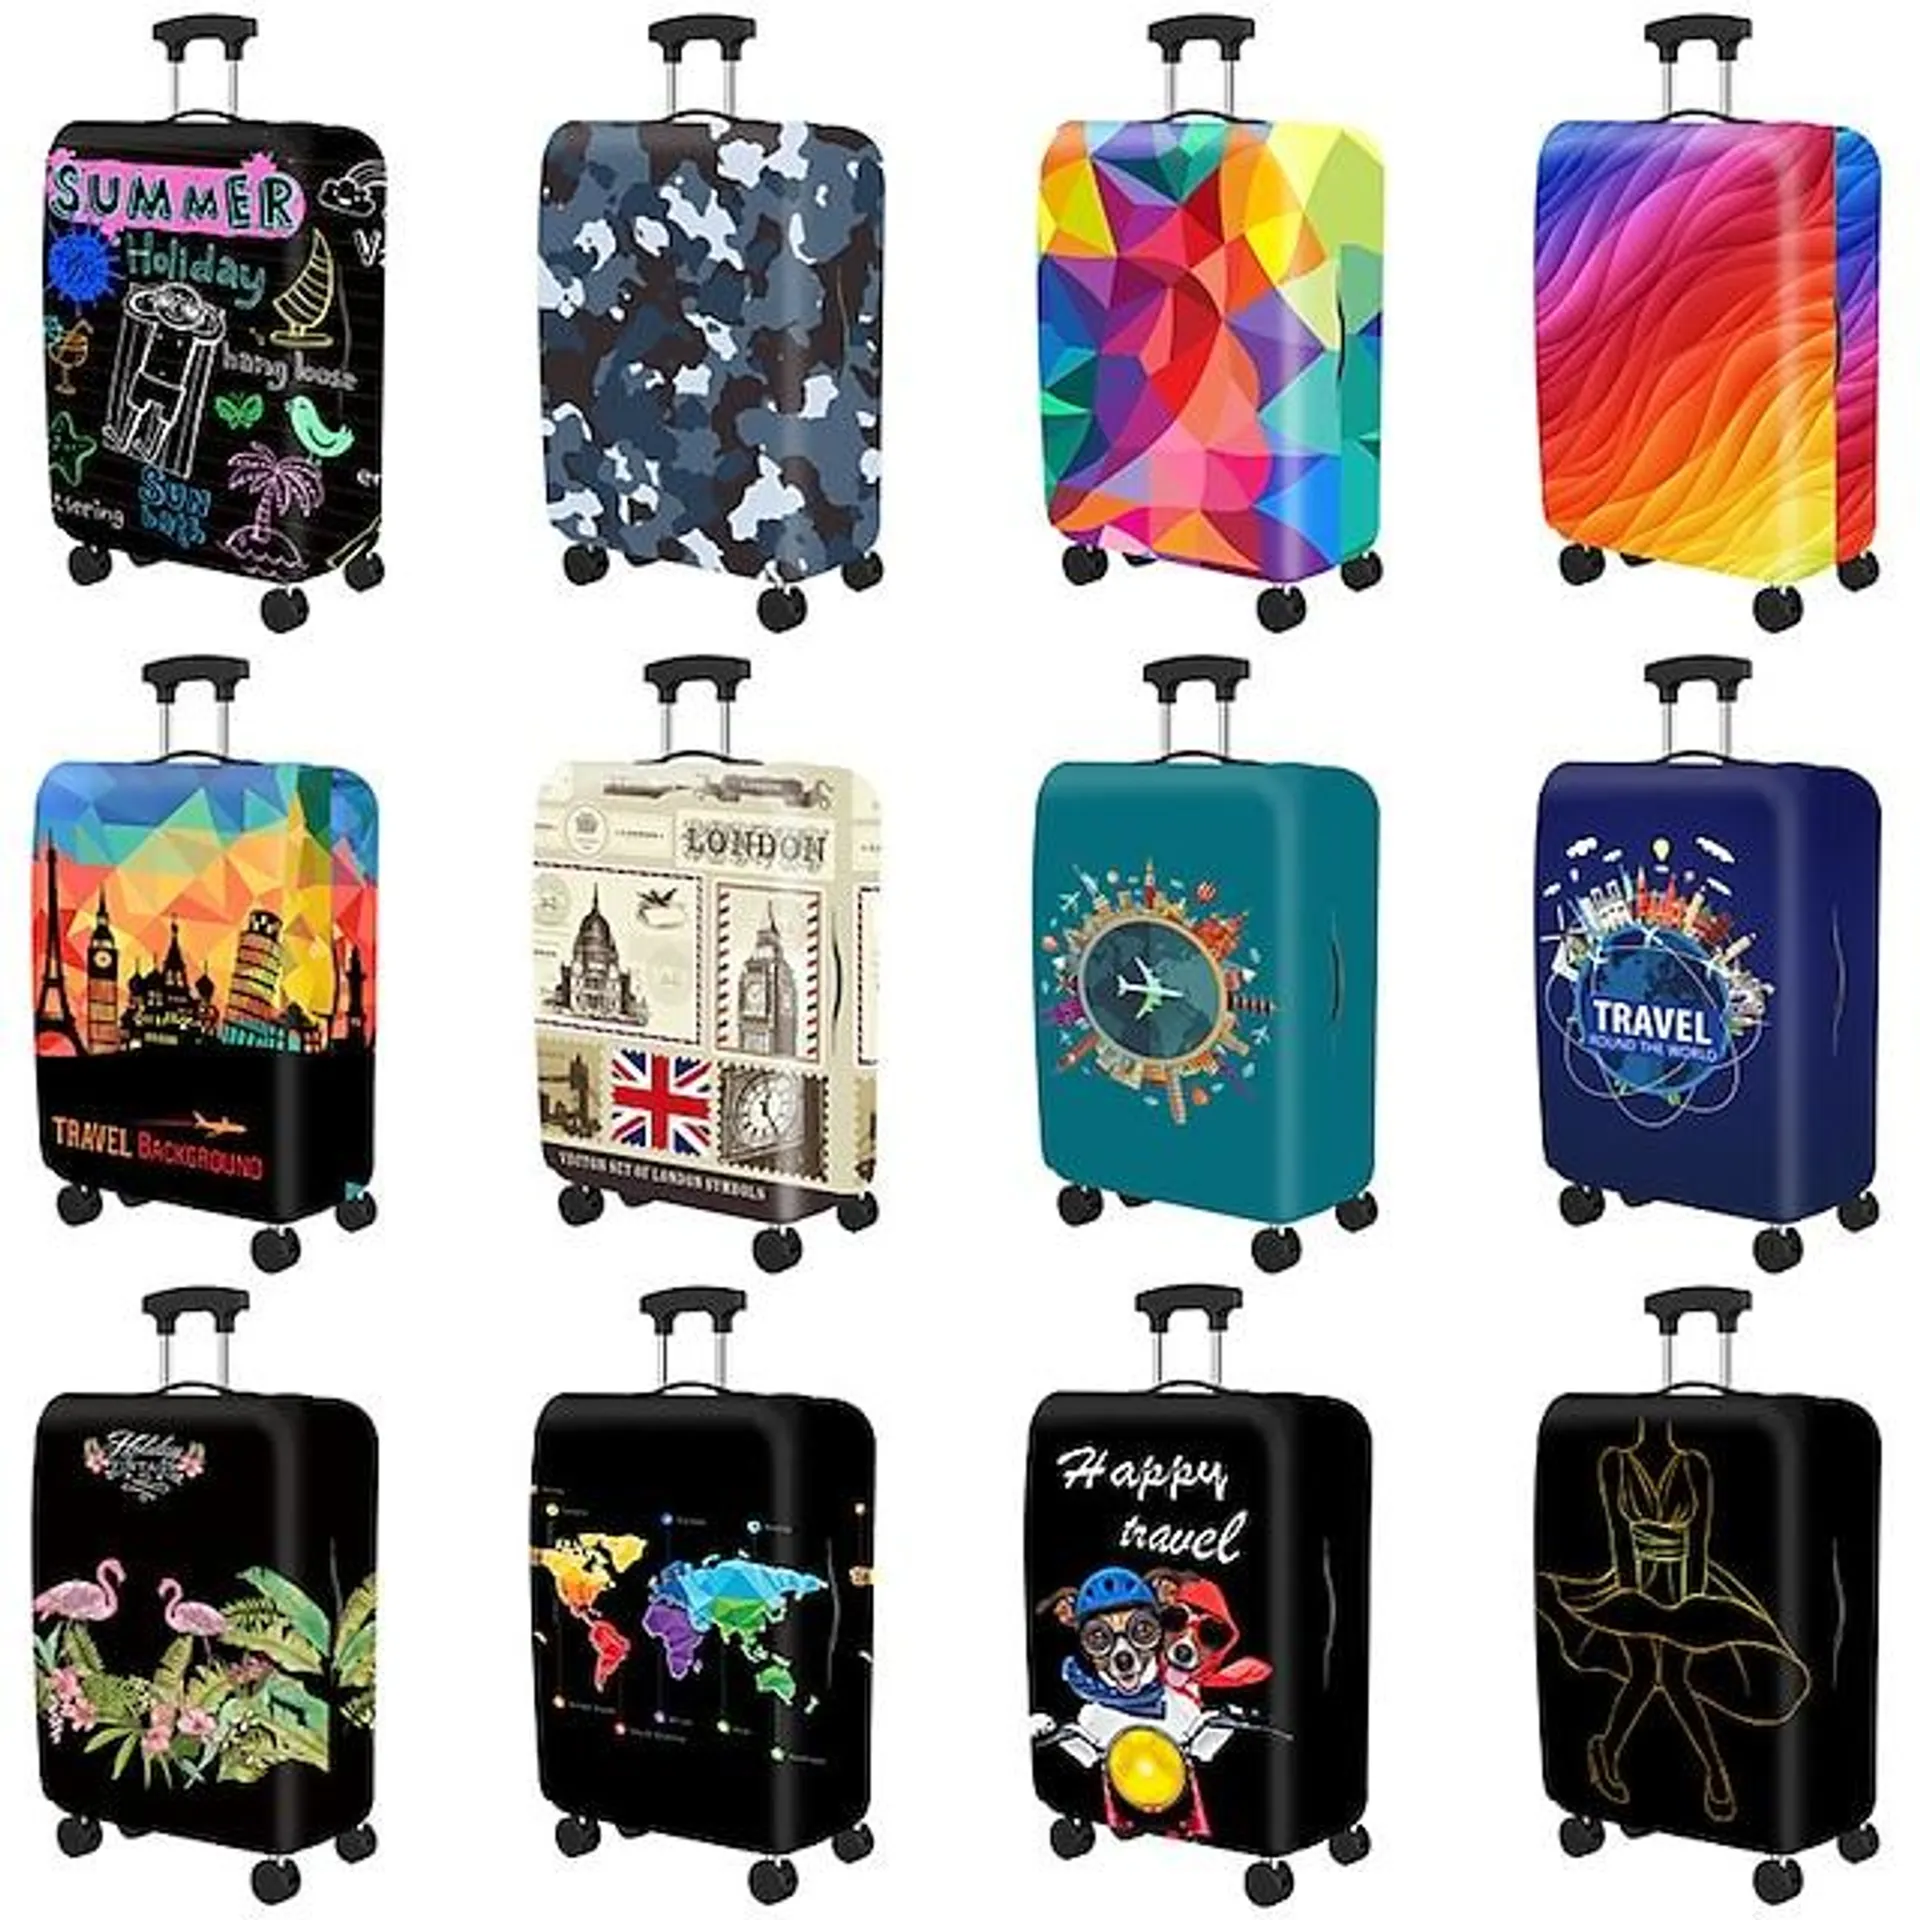 Durable Travel Luggage Cover, Dacron Elastic Suitcase Cover Protector, Foldable Washable Luggage Cover Protector